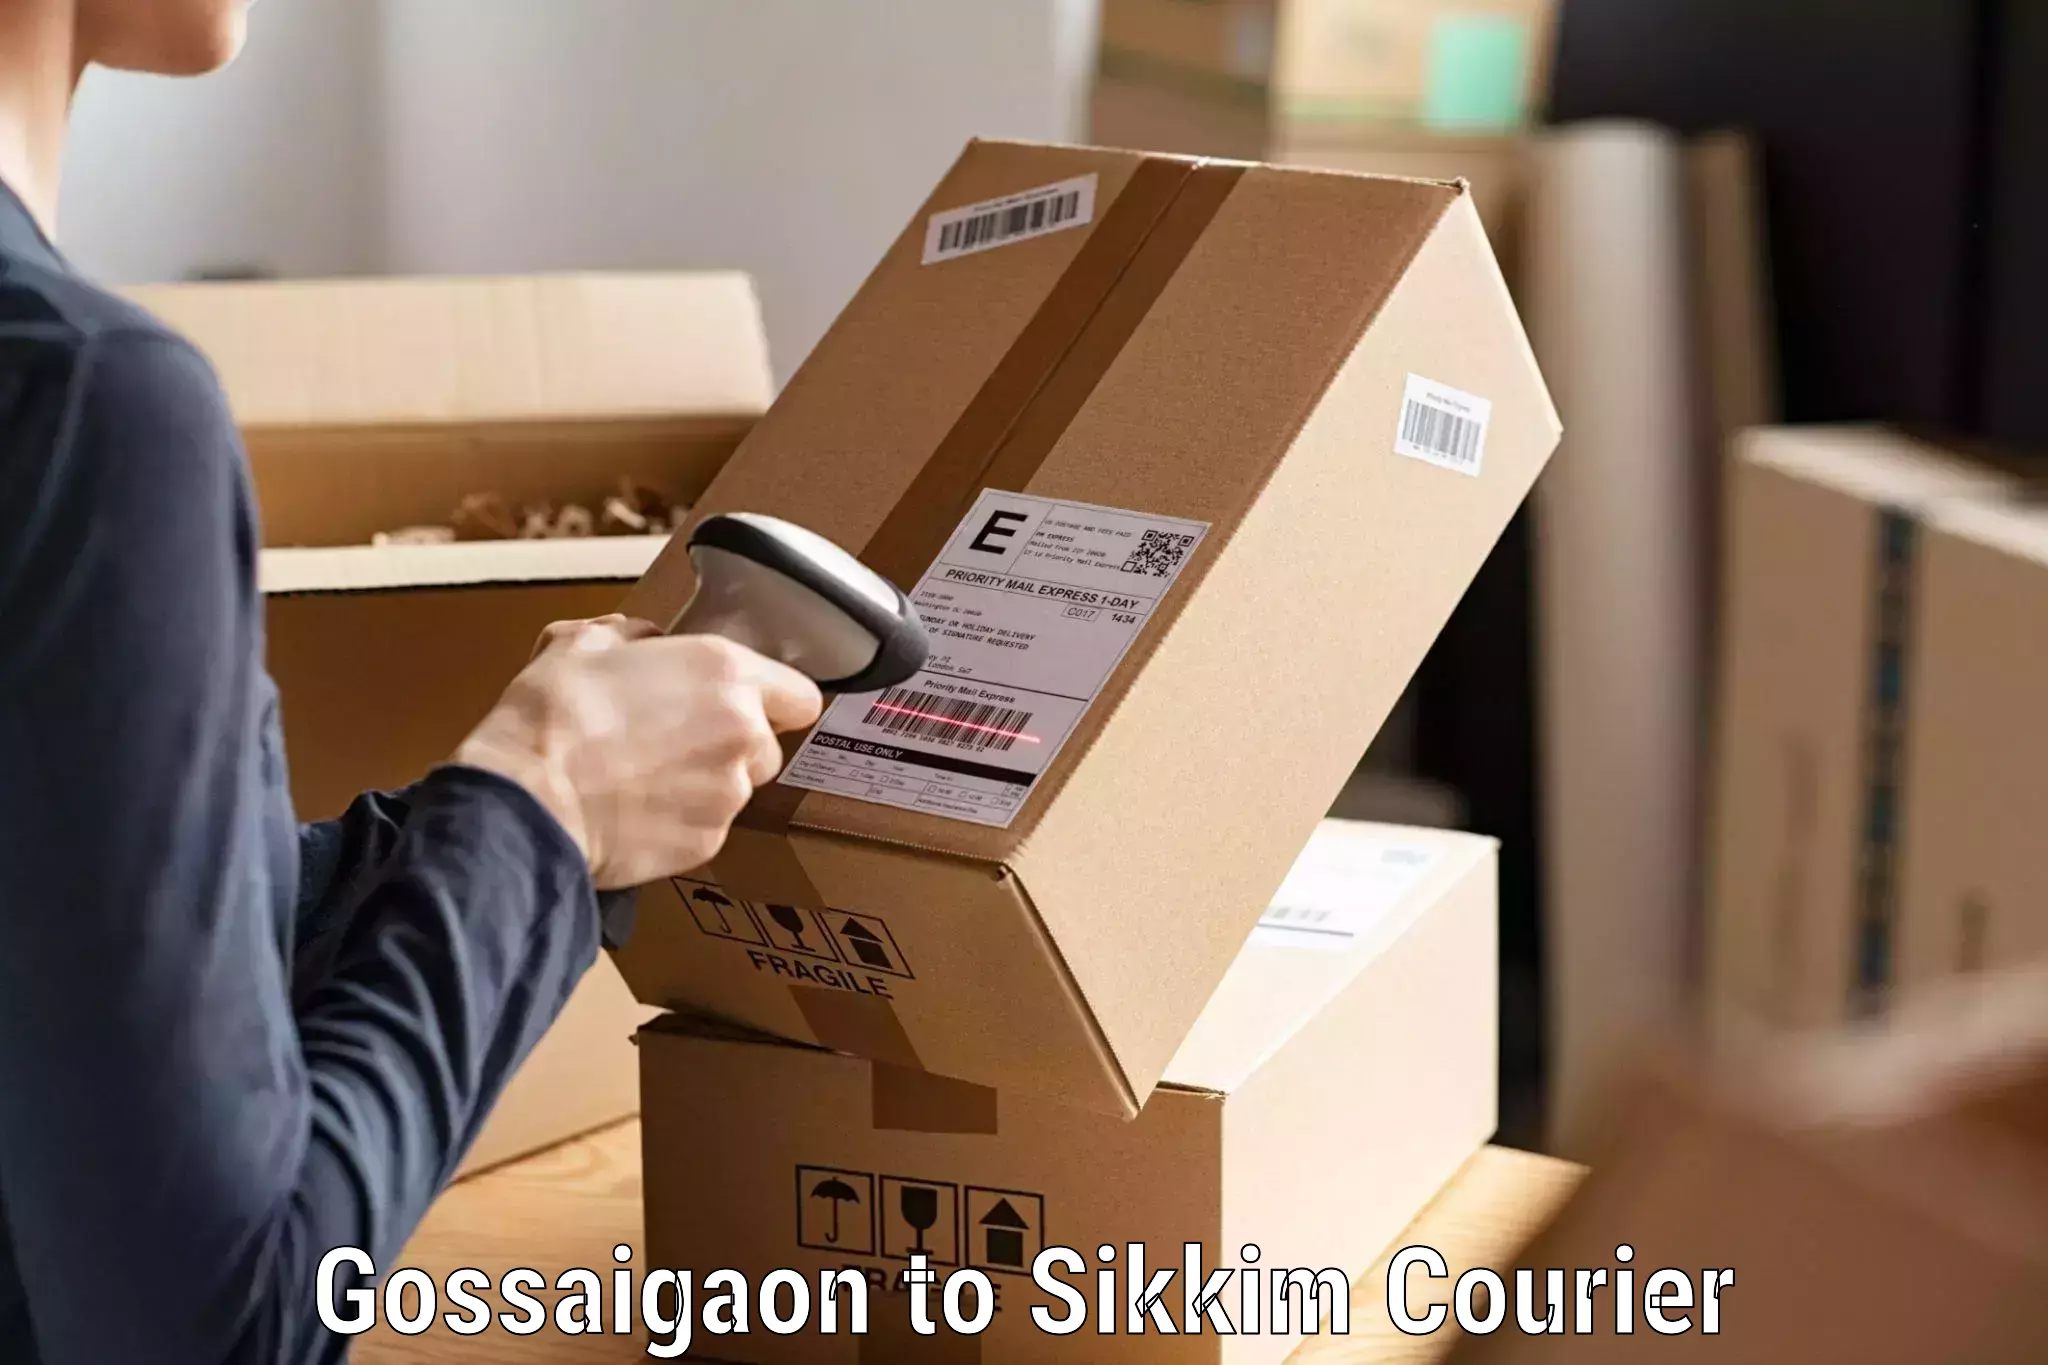 Expedited shipping methods Gossaigaon to Sikkim